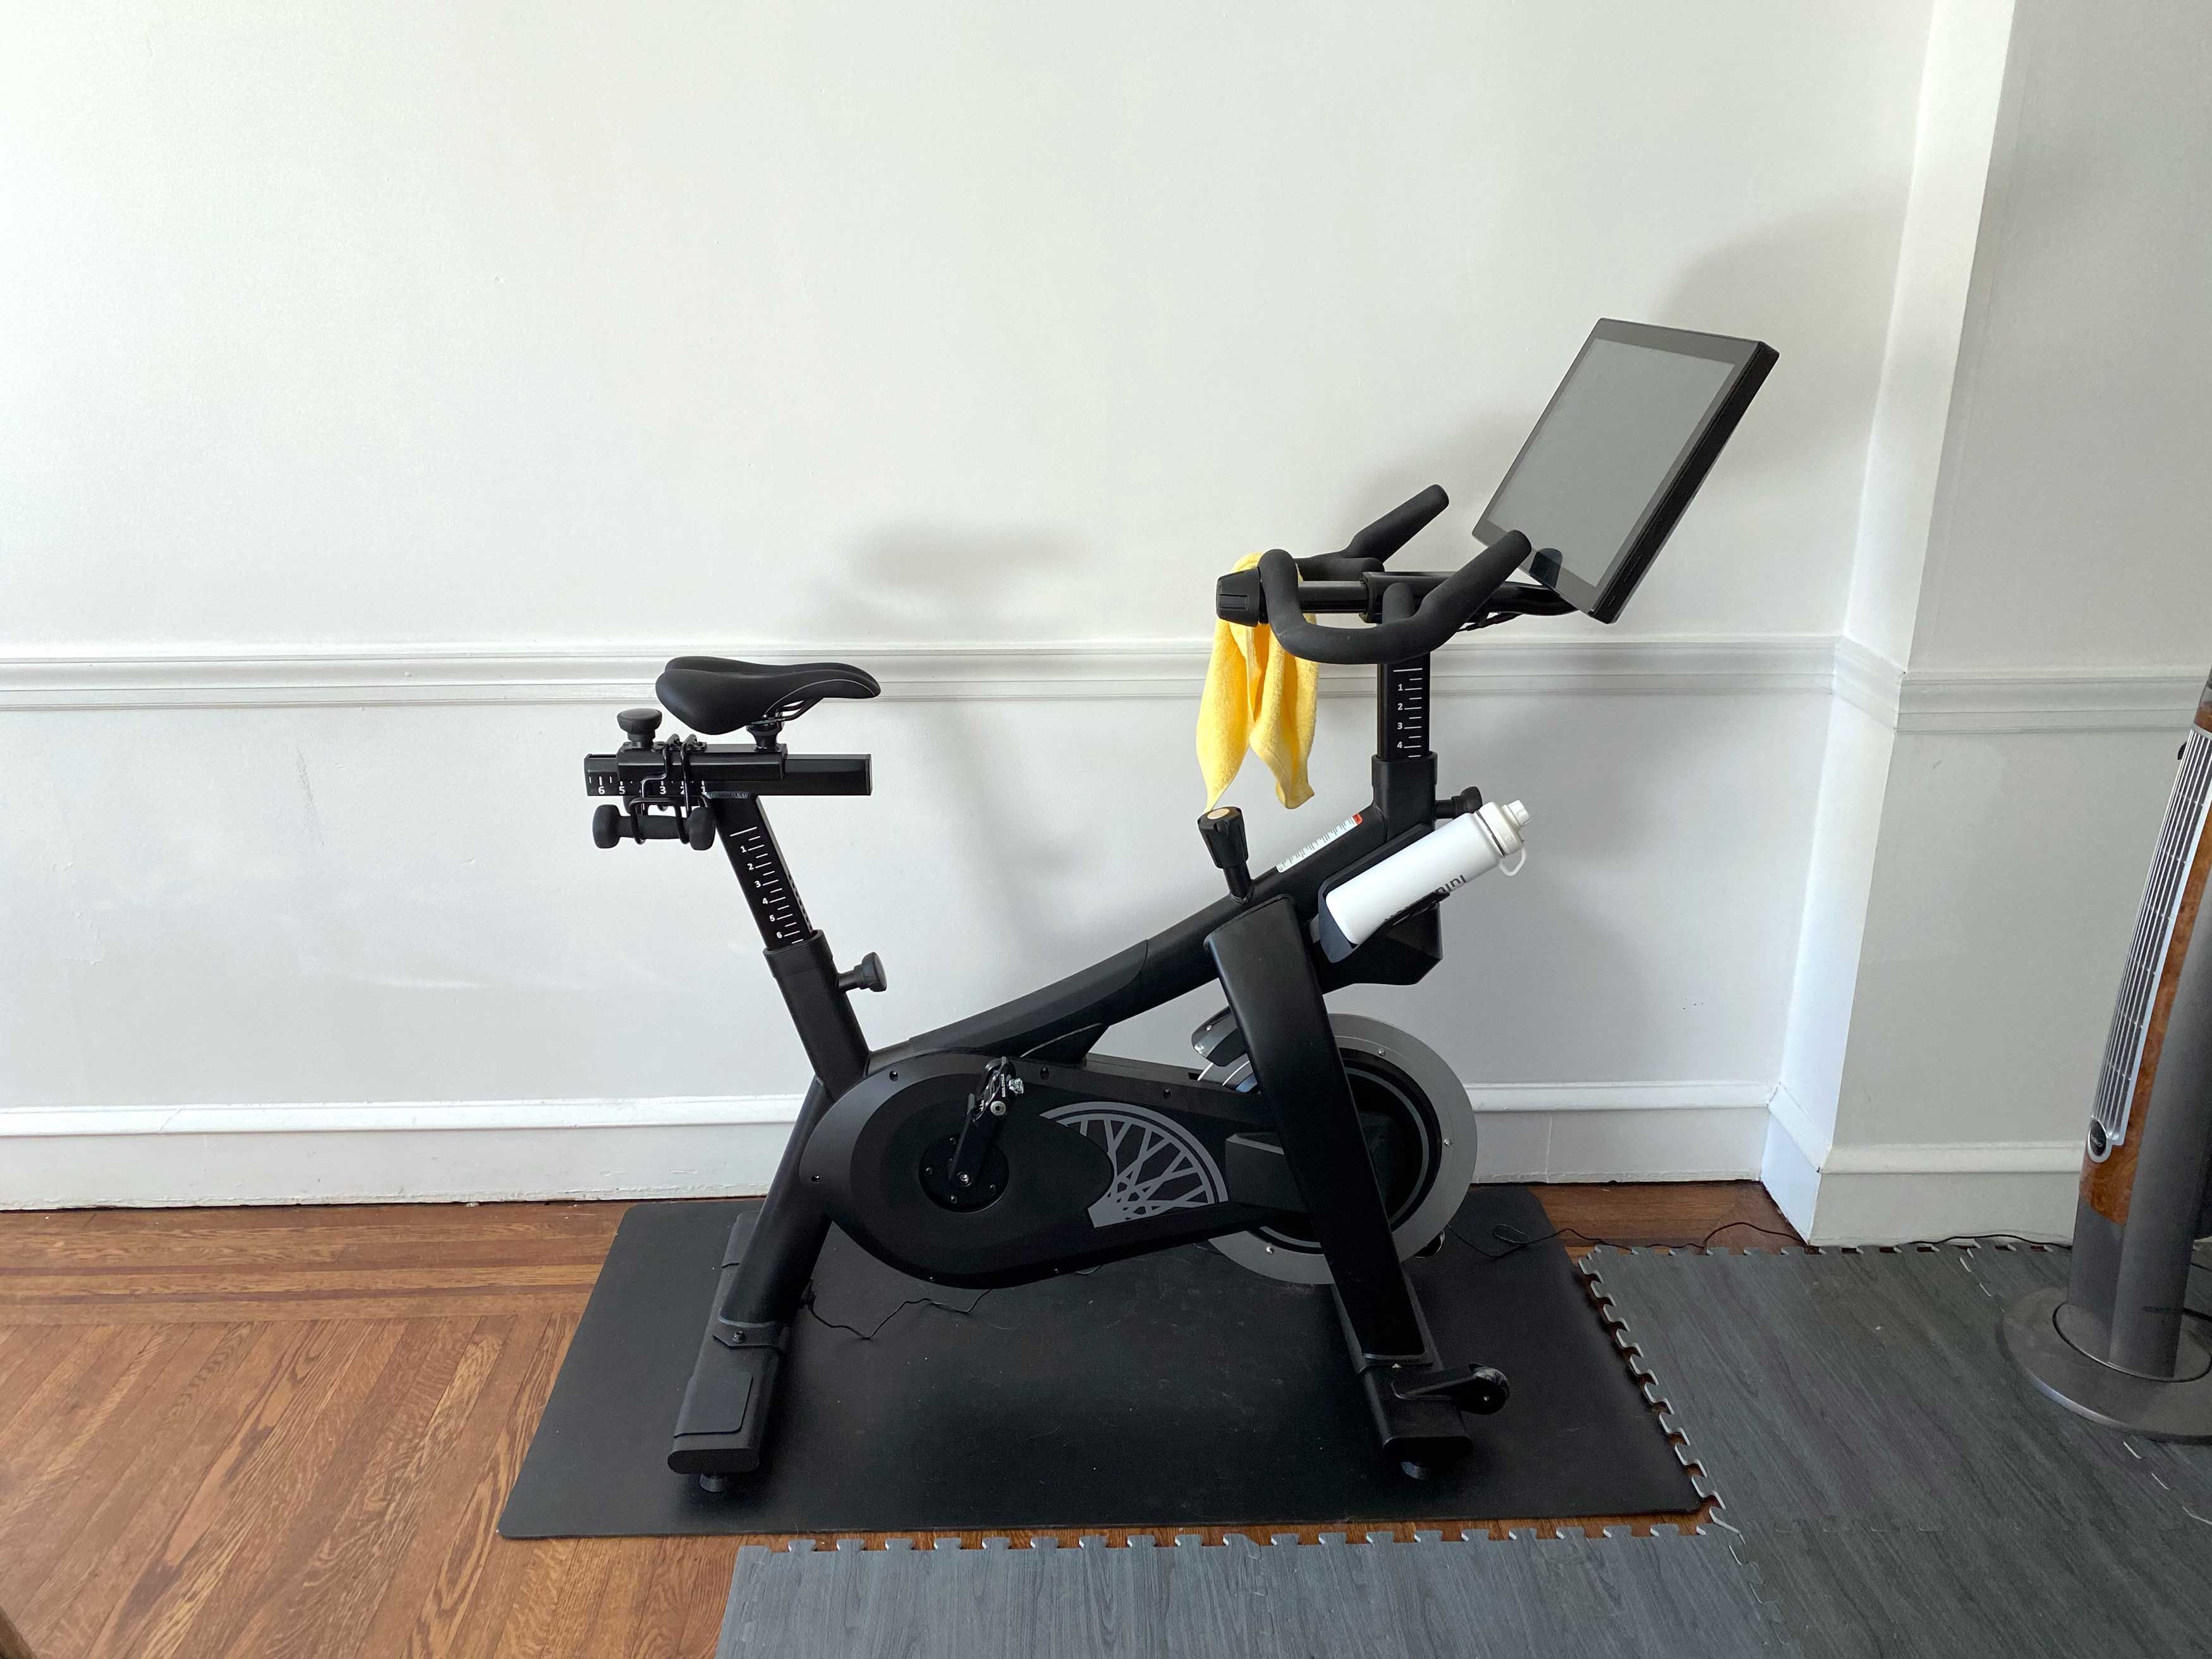 soulcycle at home bike financing